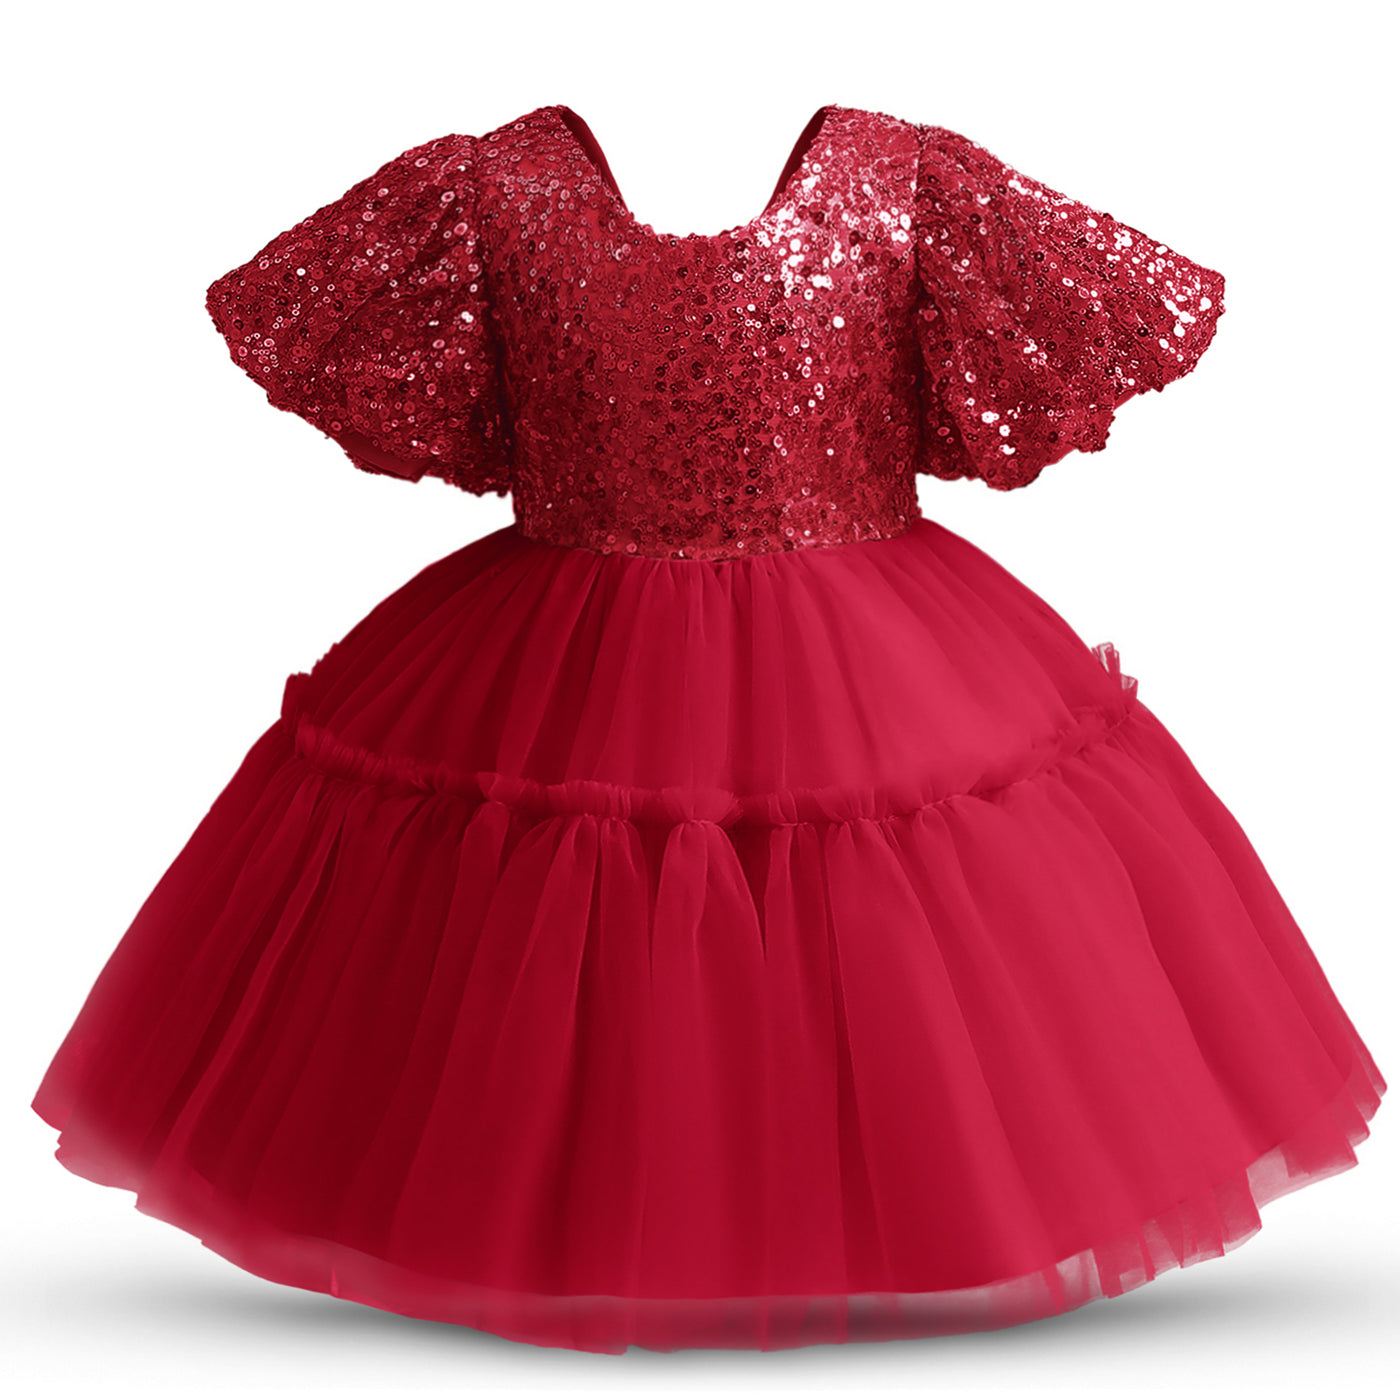 Sparkling Fancy Formal Dress 9M-5yrs Baby Toddler Girl Dress - Coco Potato - dresses and partywear for little girls